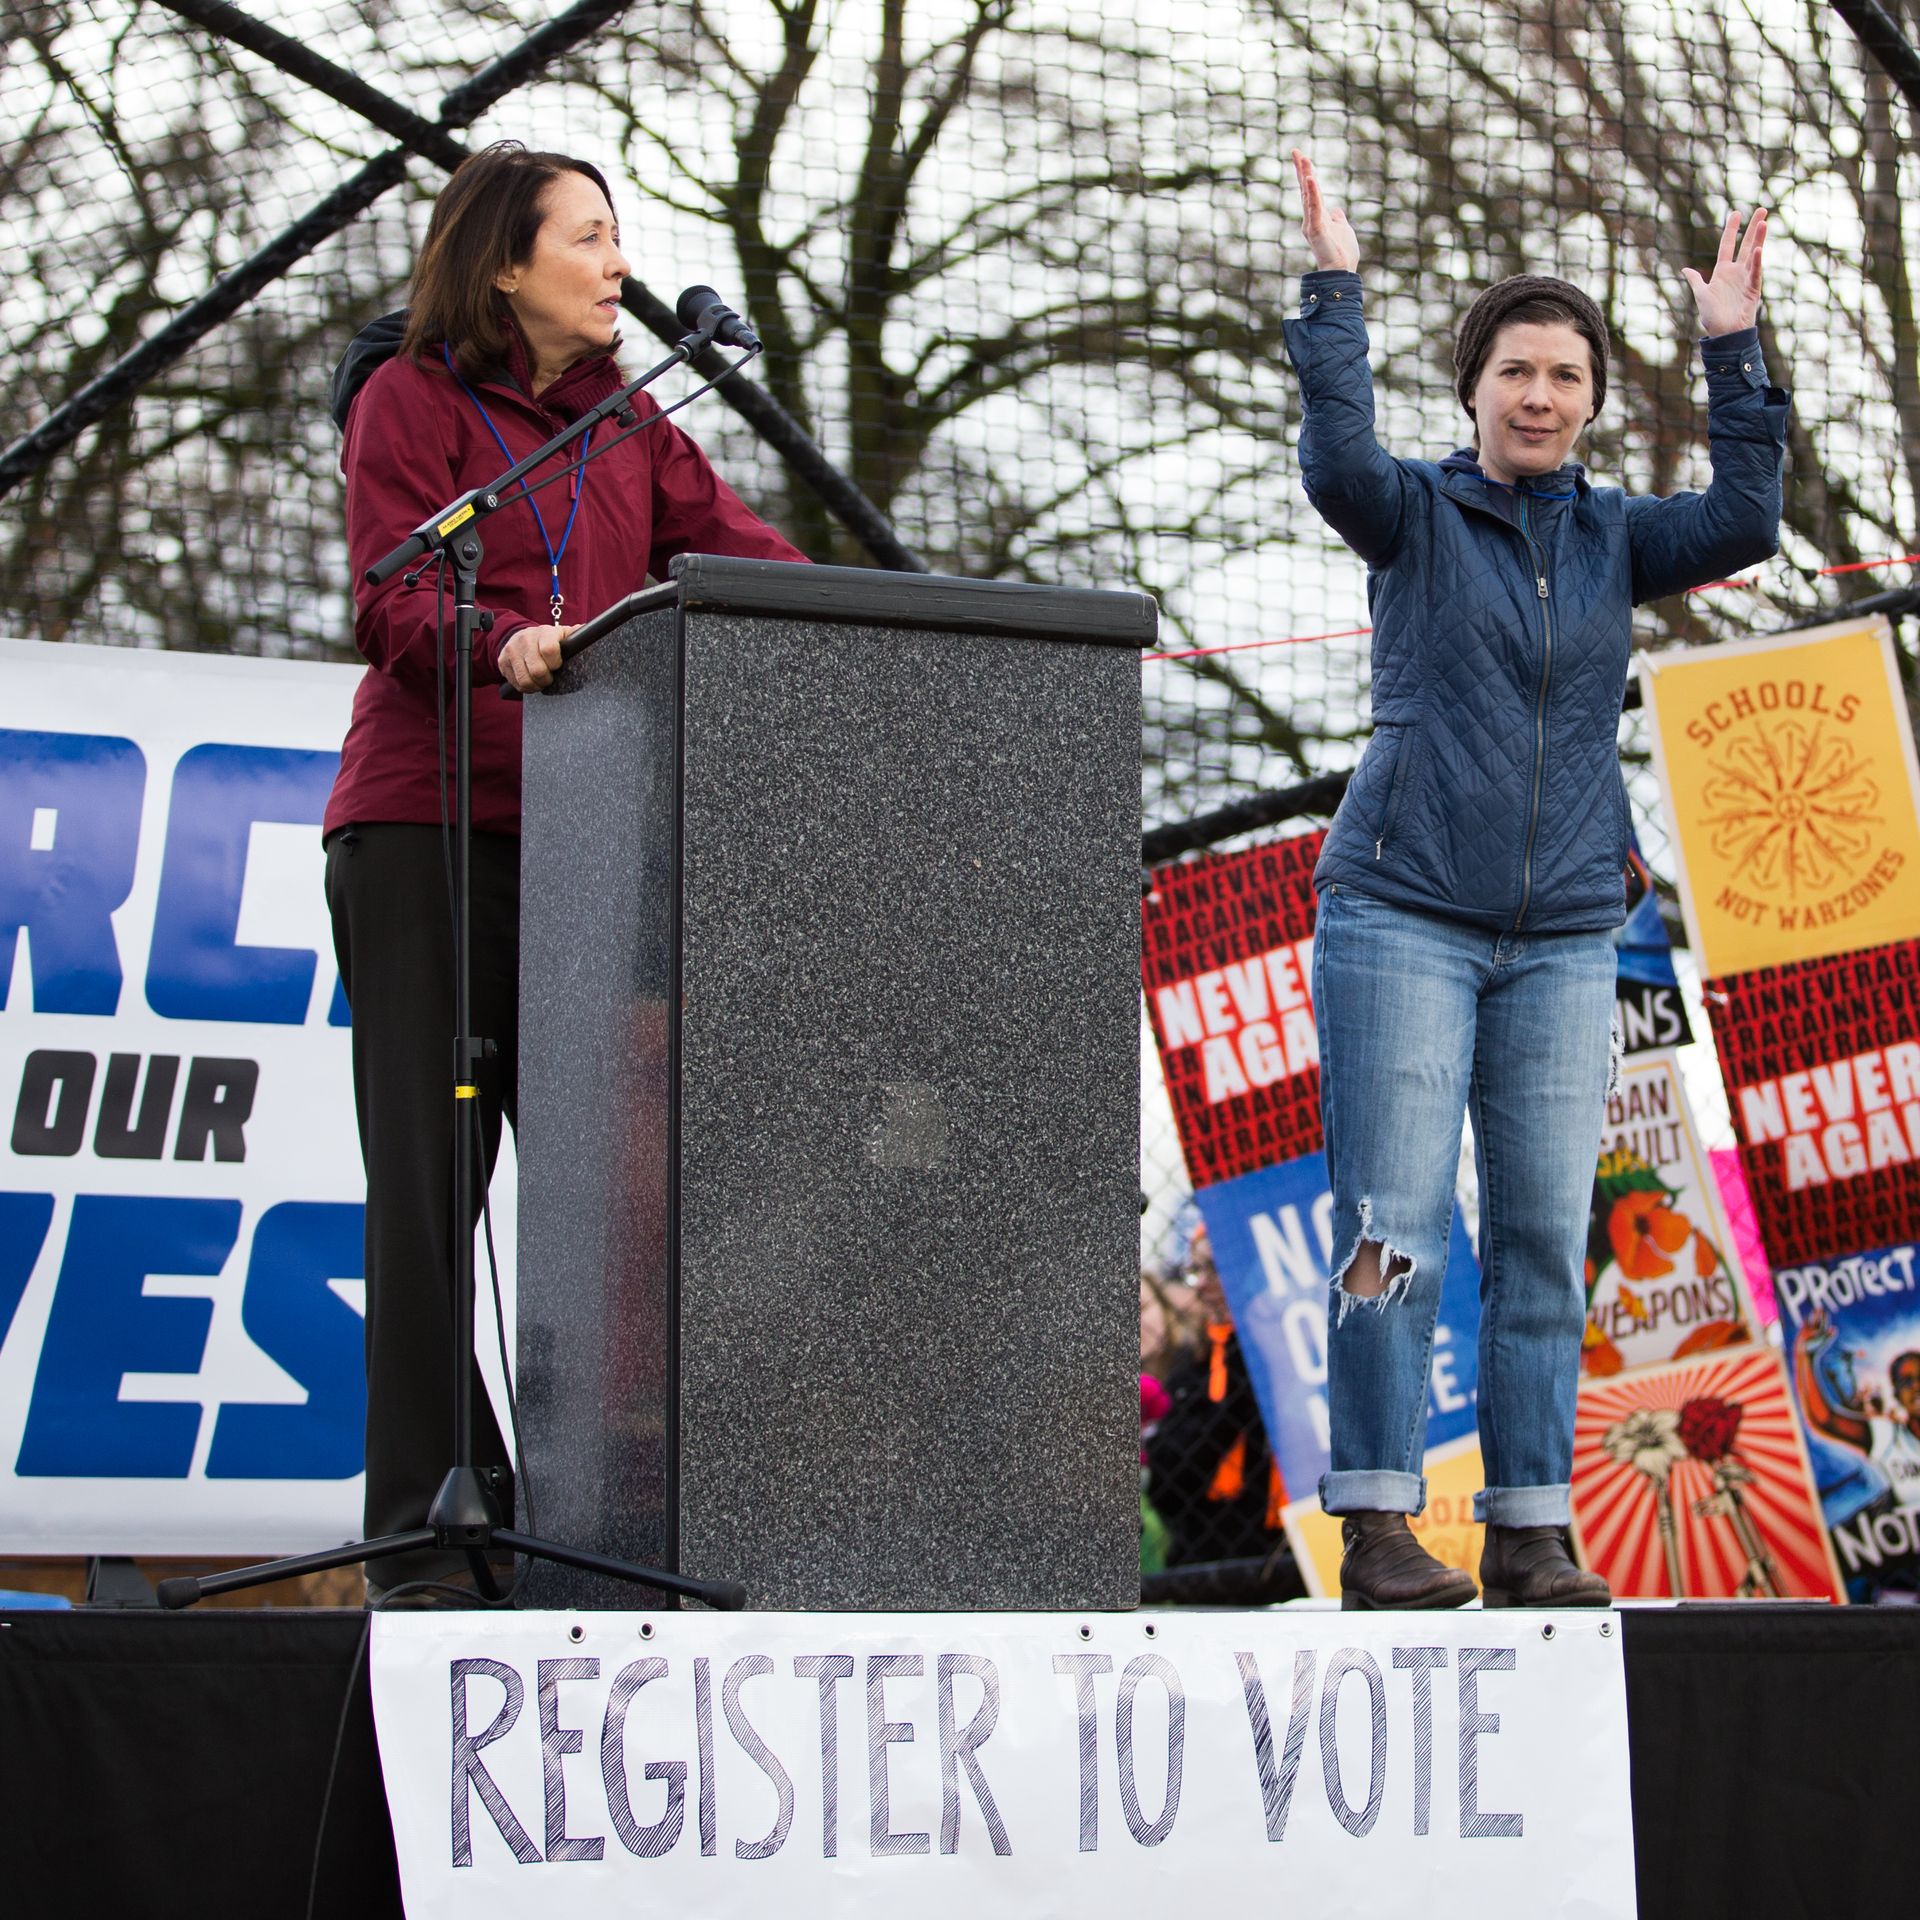 Democratic Senator Maria Cantwell, left, speaks at Cal Anderson Park during the March for Our Lives rally on March 24, 2018 in Seattle, Washington.